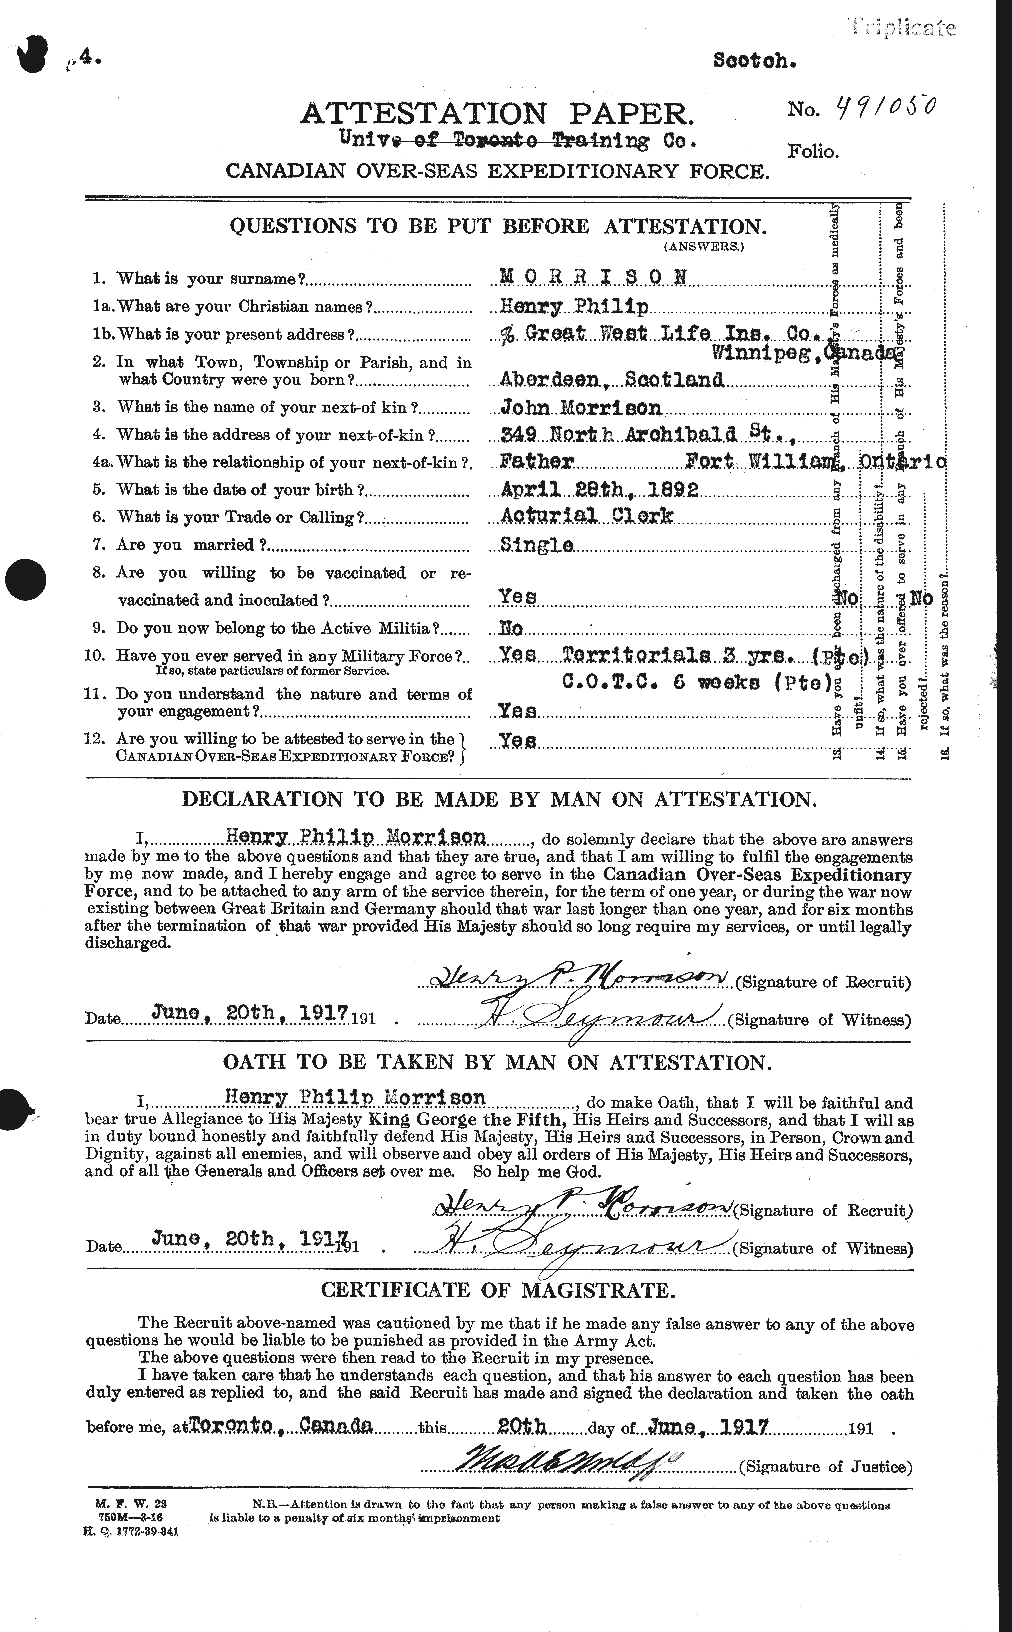 Personnel Records of the First World War - CEF 506864a